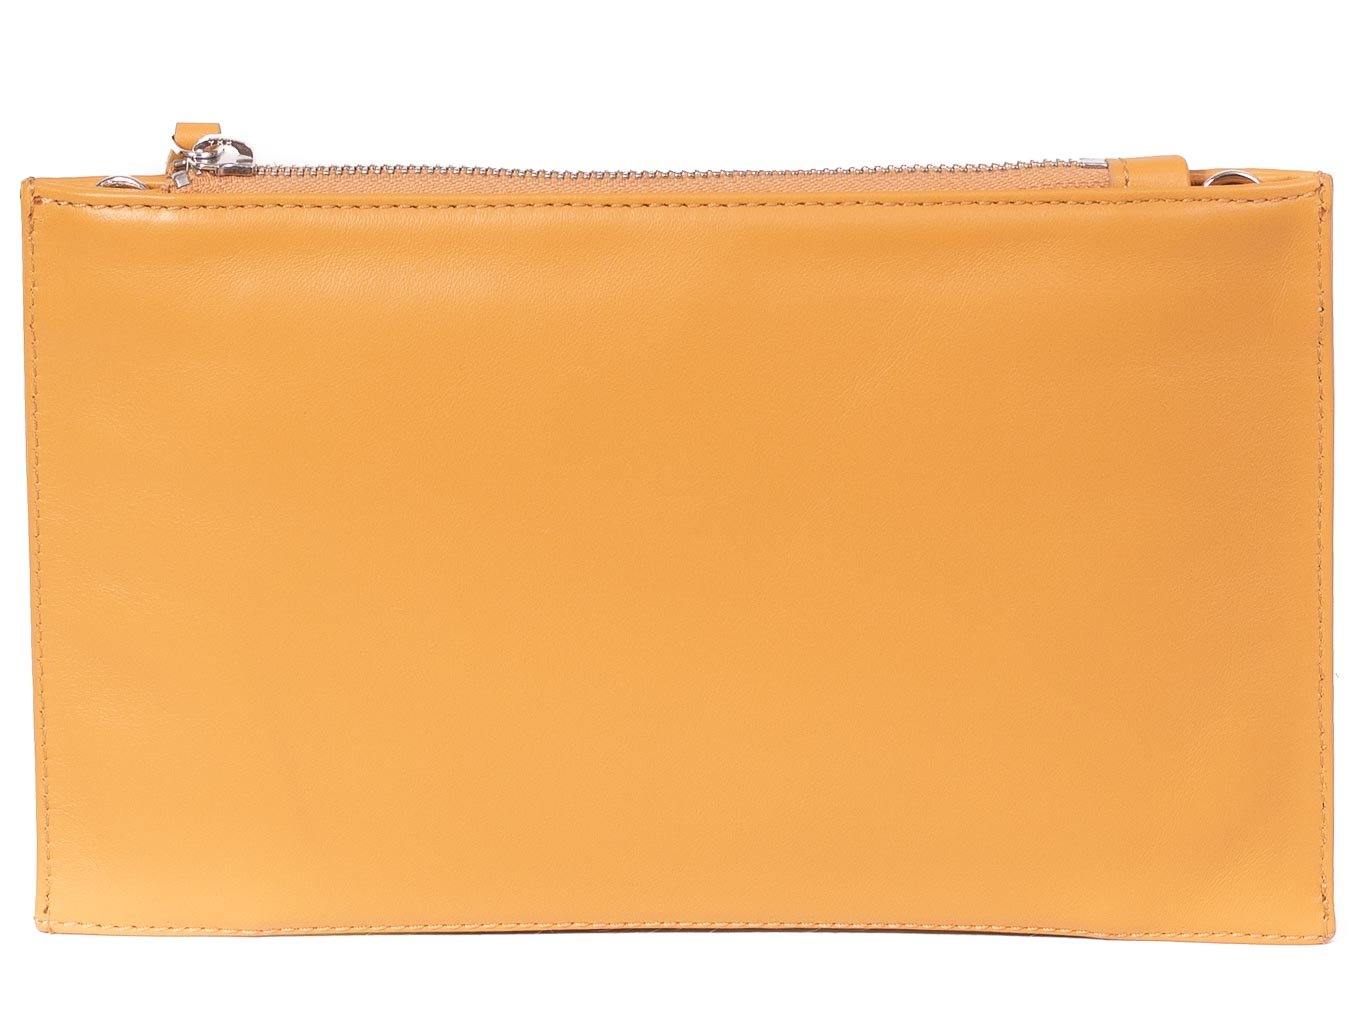 Clutch Springbok Handbag in Sunflower Yellow with a stripe feature by Sherene Melinda back